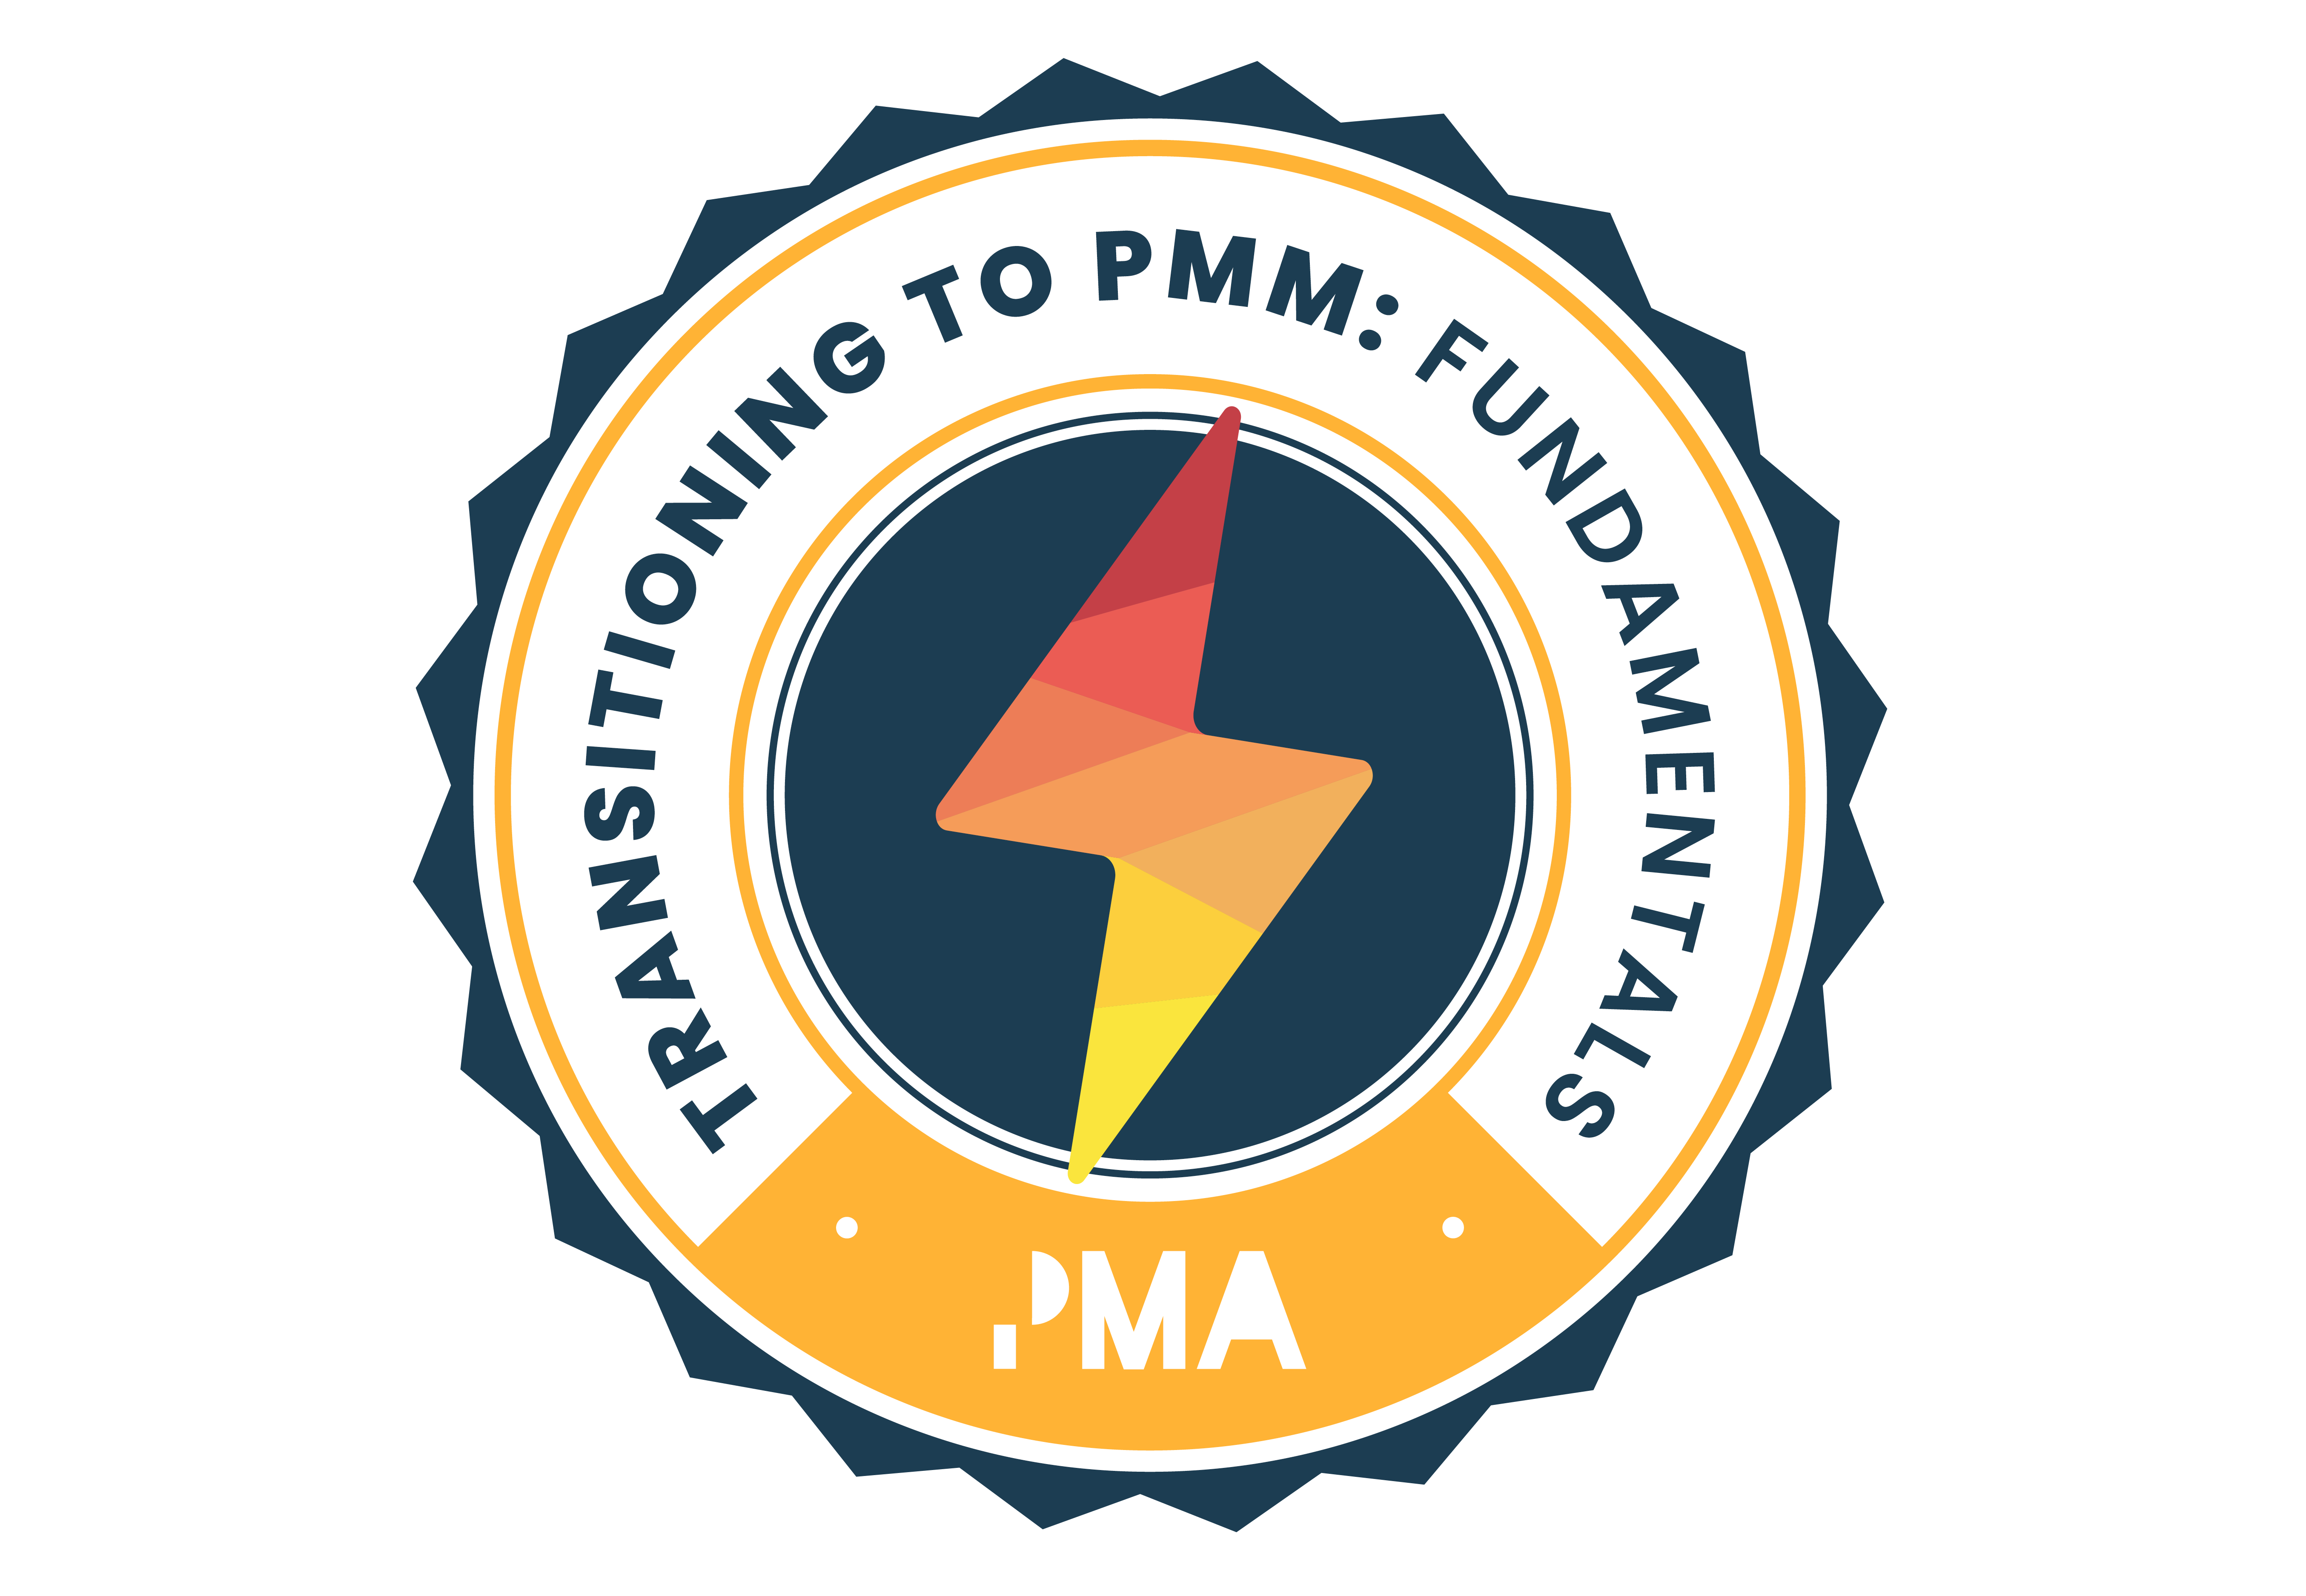 Transitioning to PMM badge